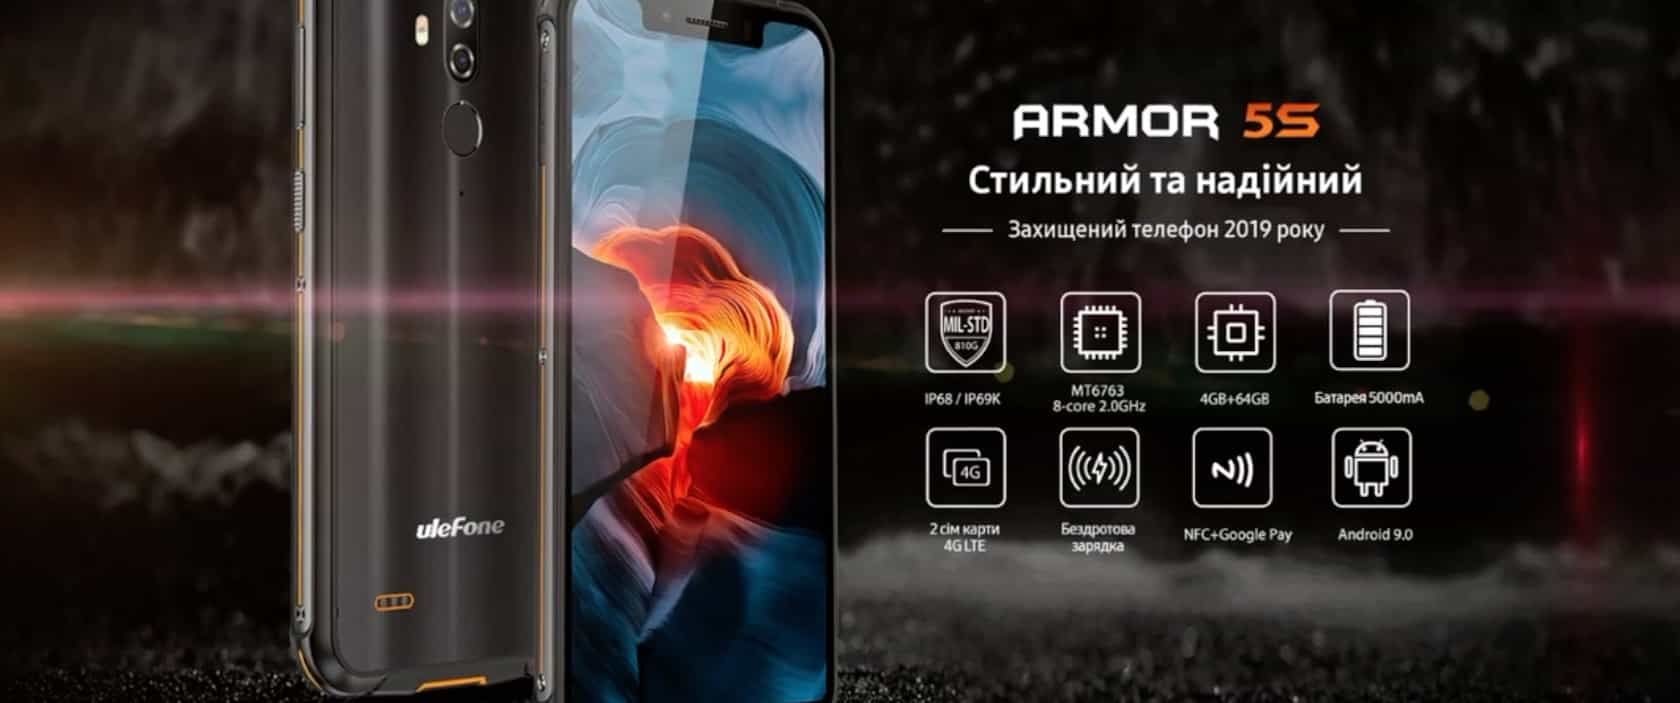 Case video review of gadgets" ARMOR 5S Smartphone. Case"